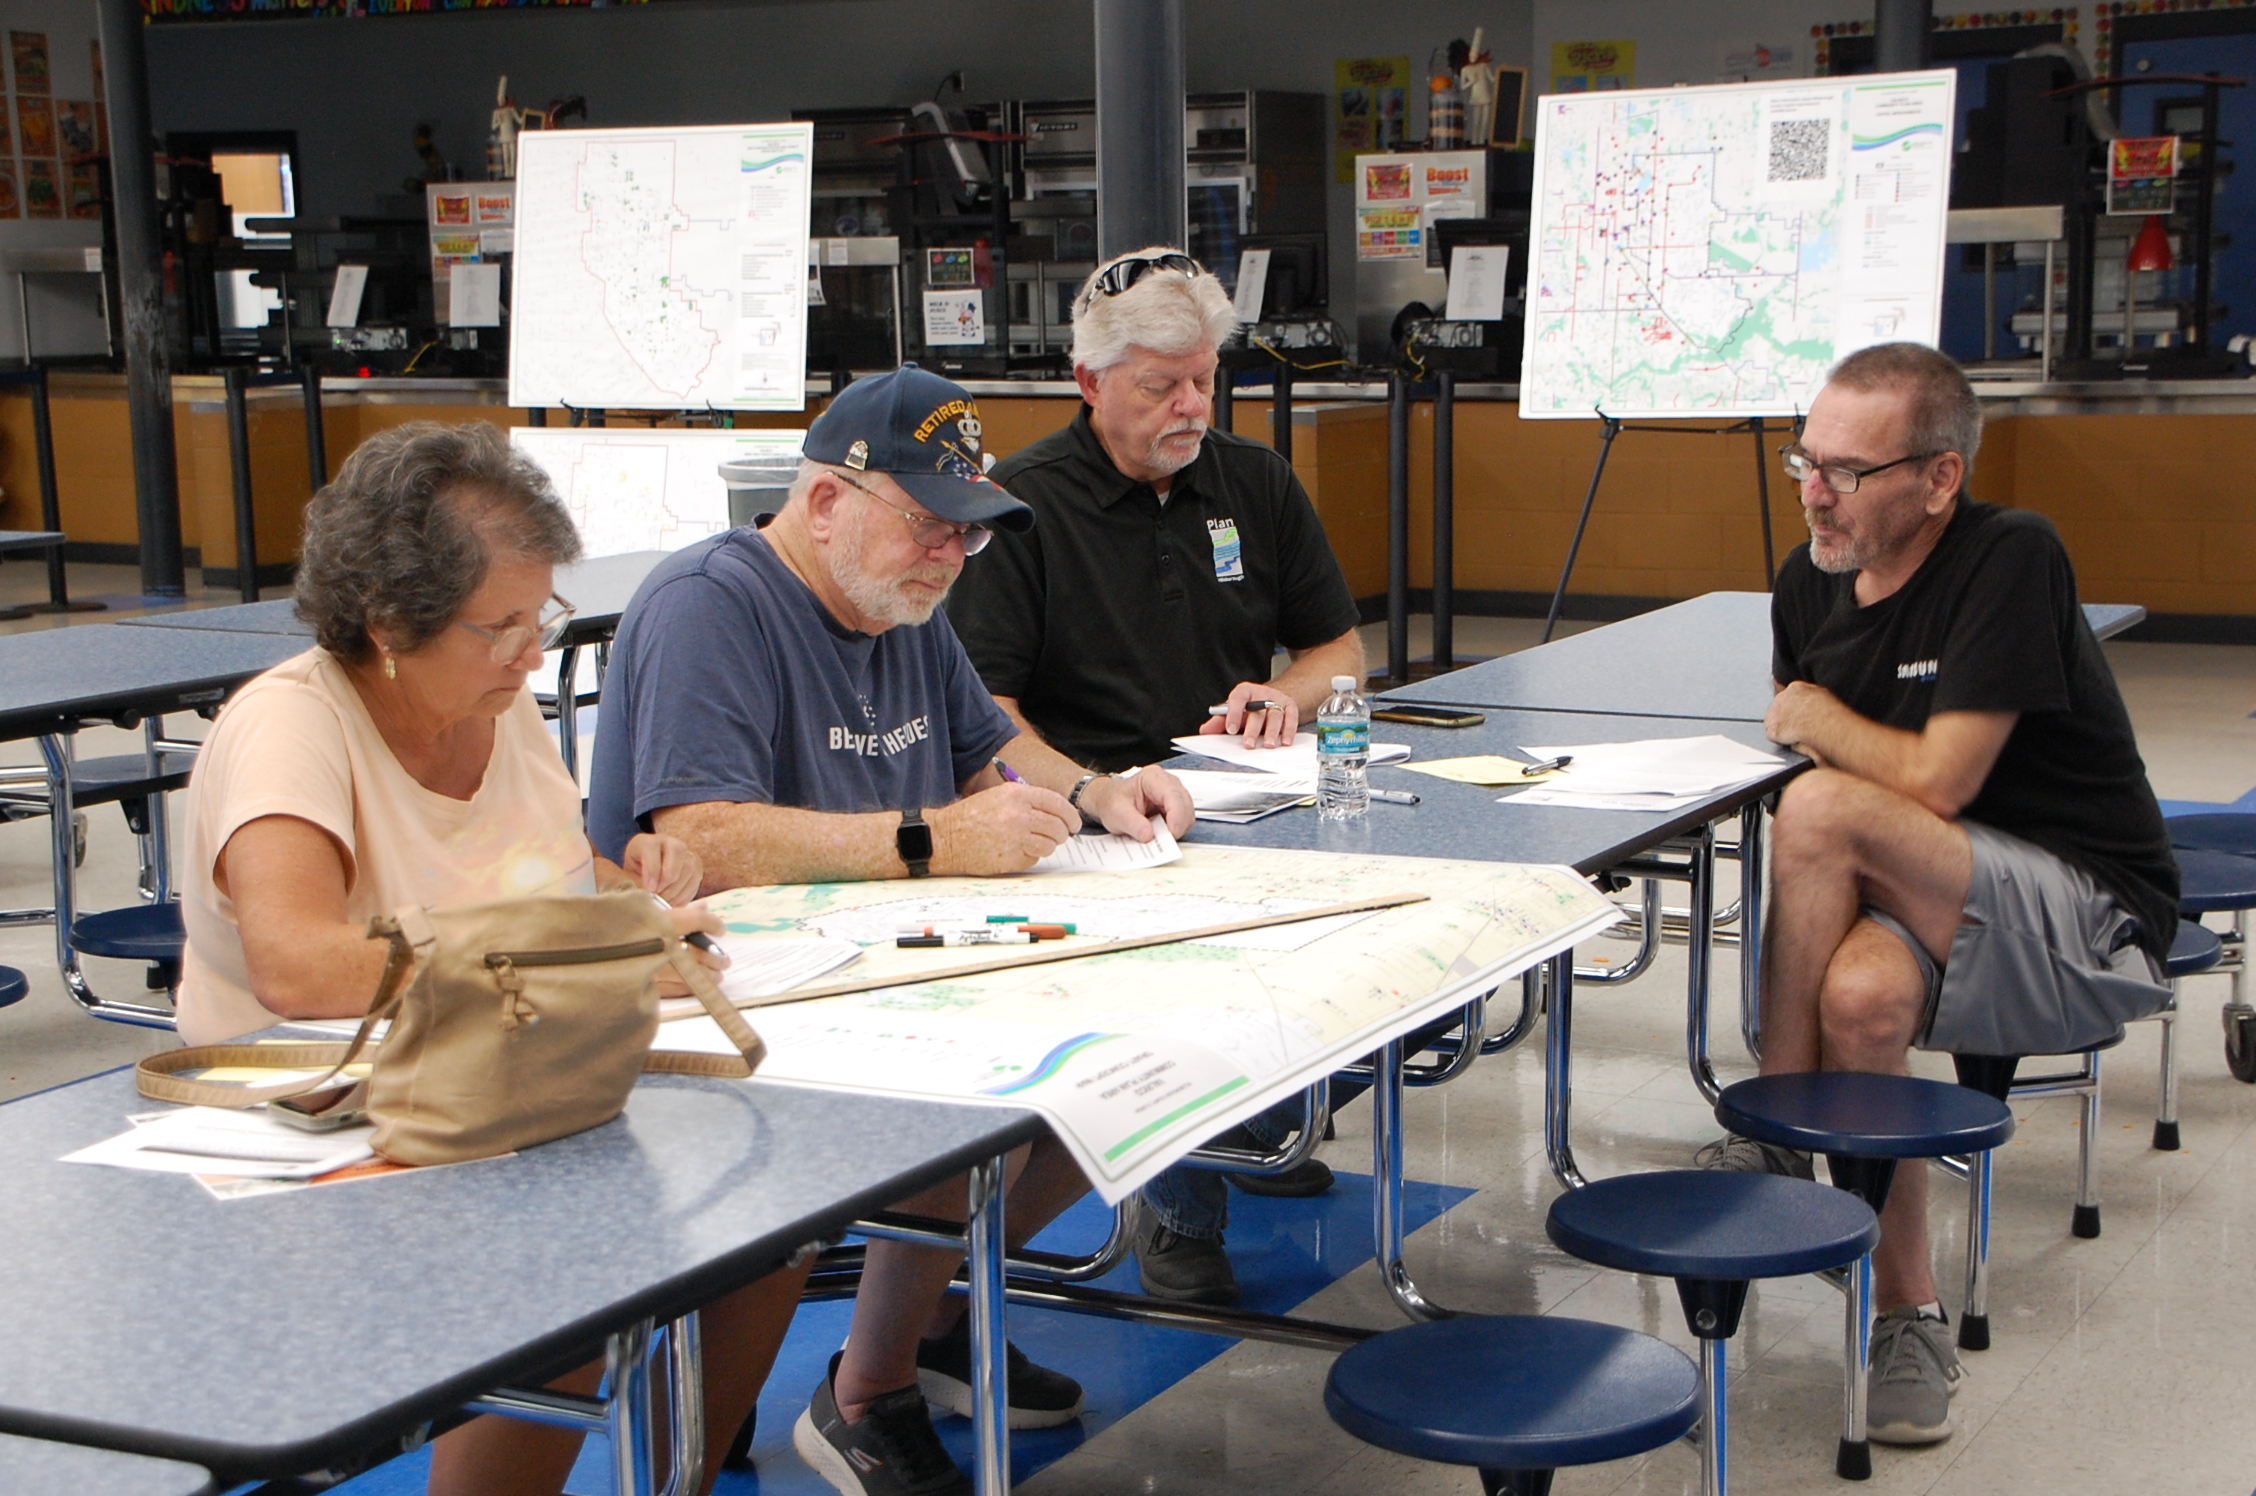 Community members sitting at a table drawing on a map of Valrico.